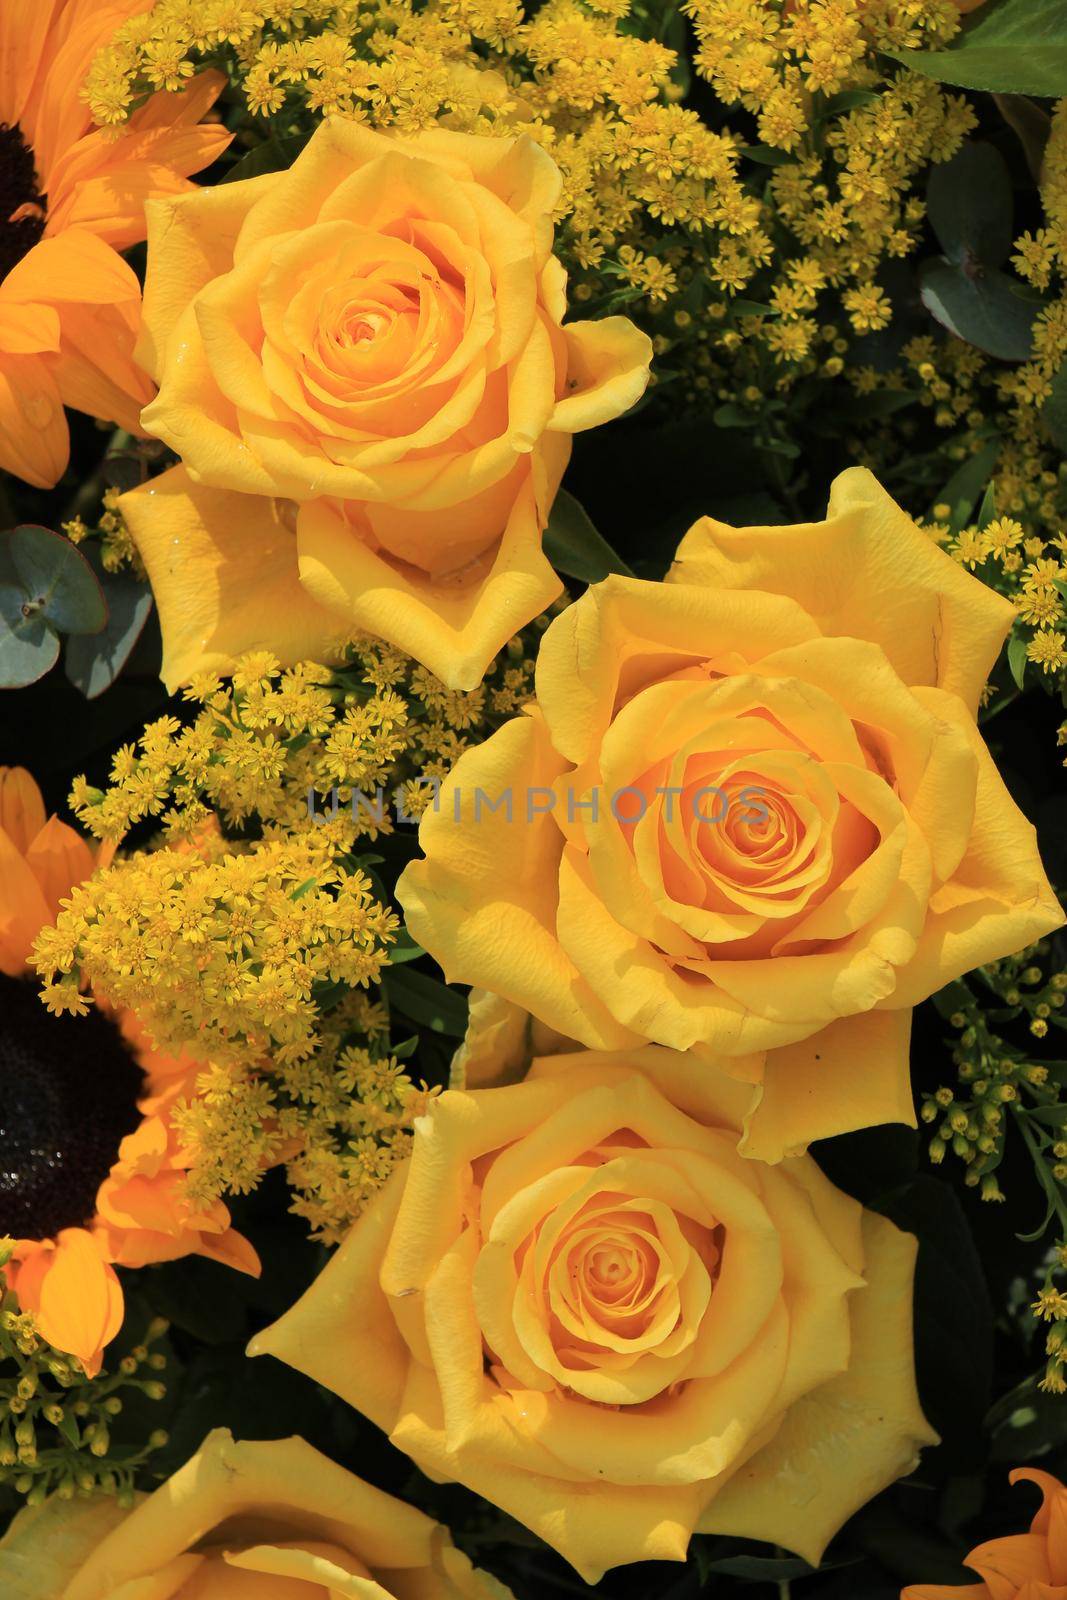 Mixed flower arrangement: various flowers in different shades of yellow for a wedding